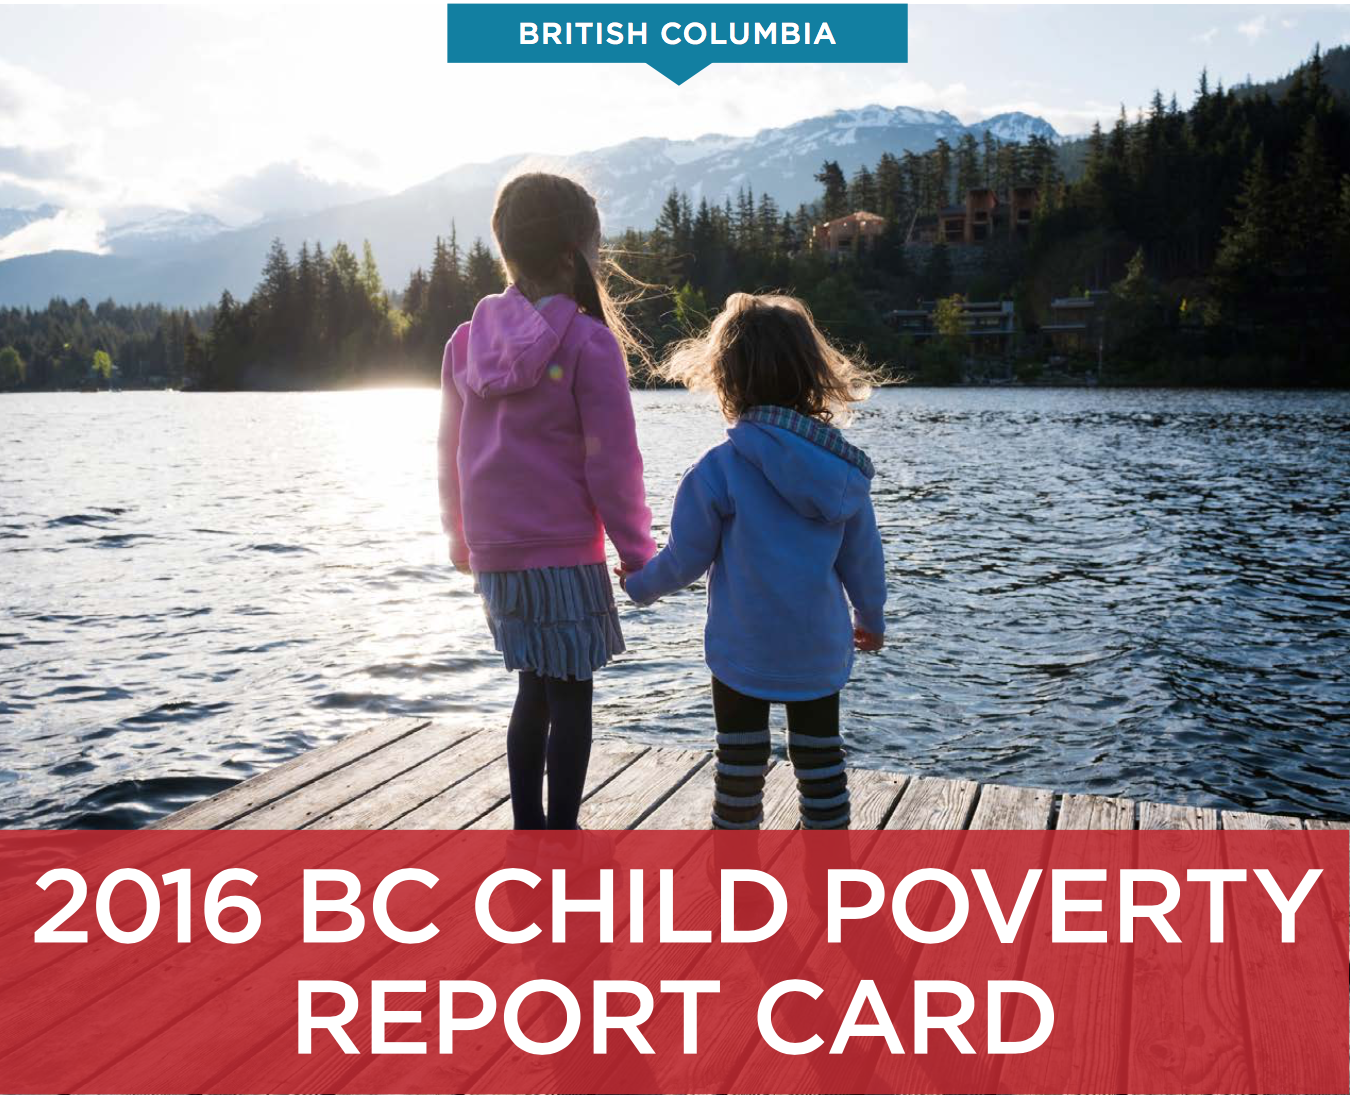 2016 BC Child Poverty Report Card graphic